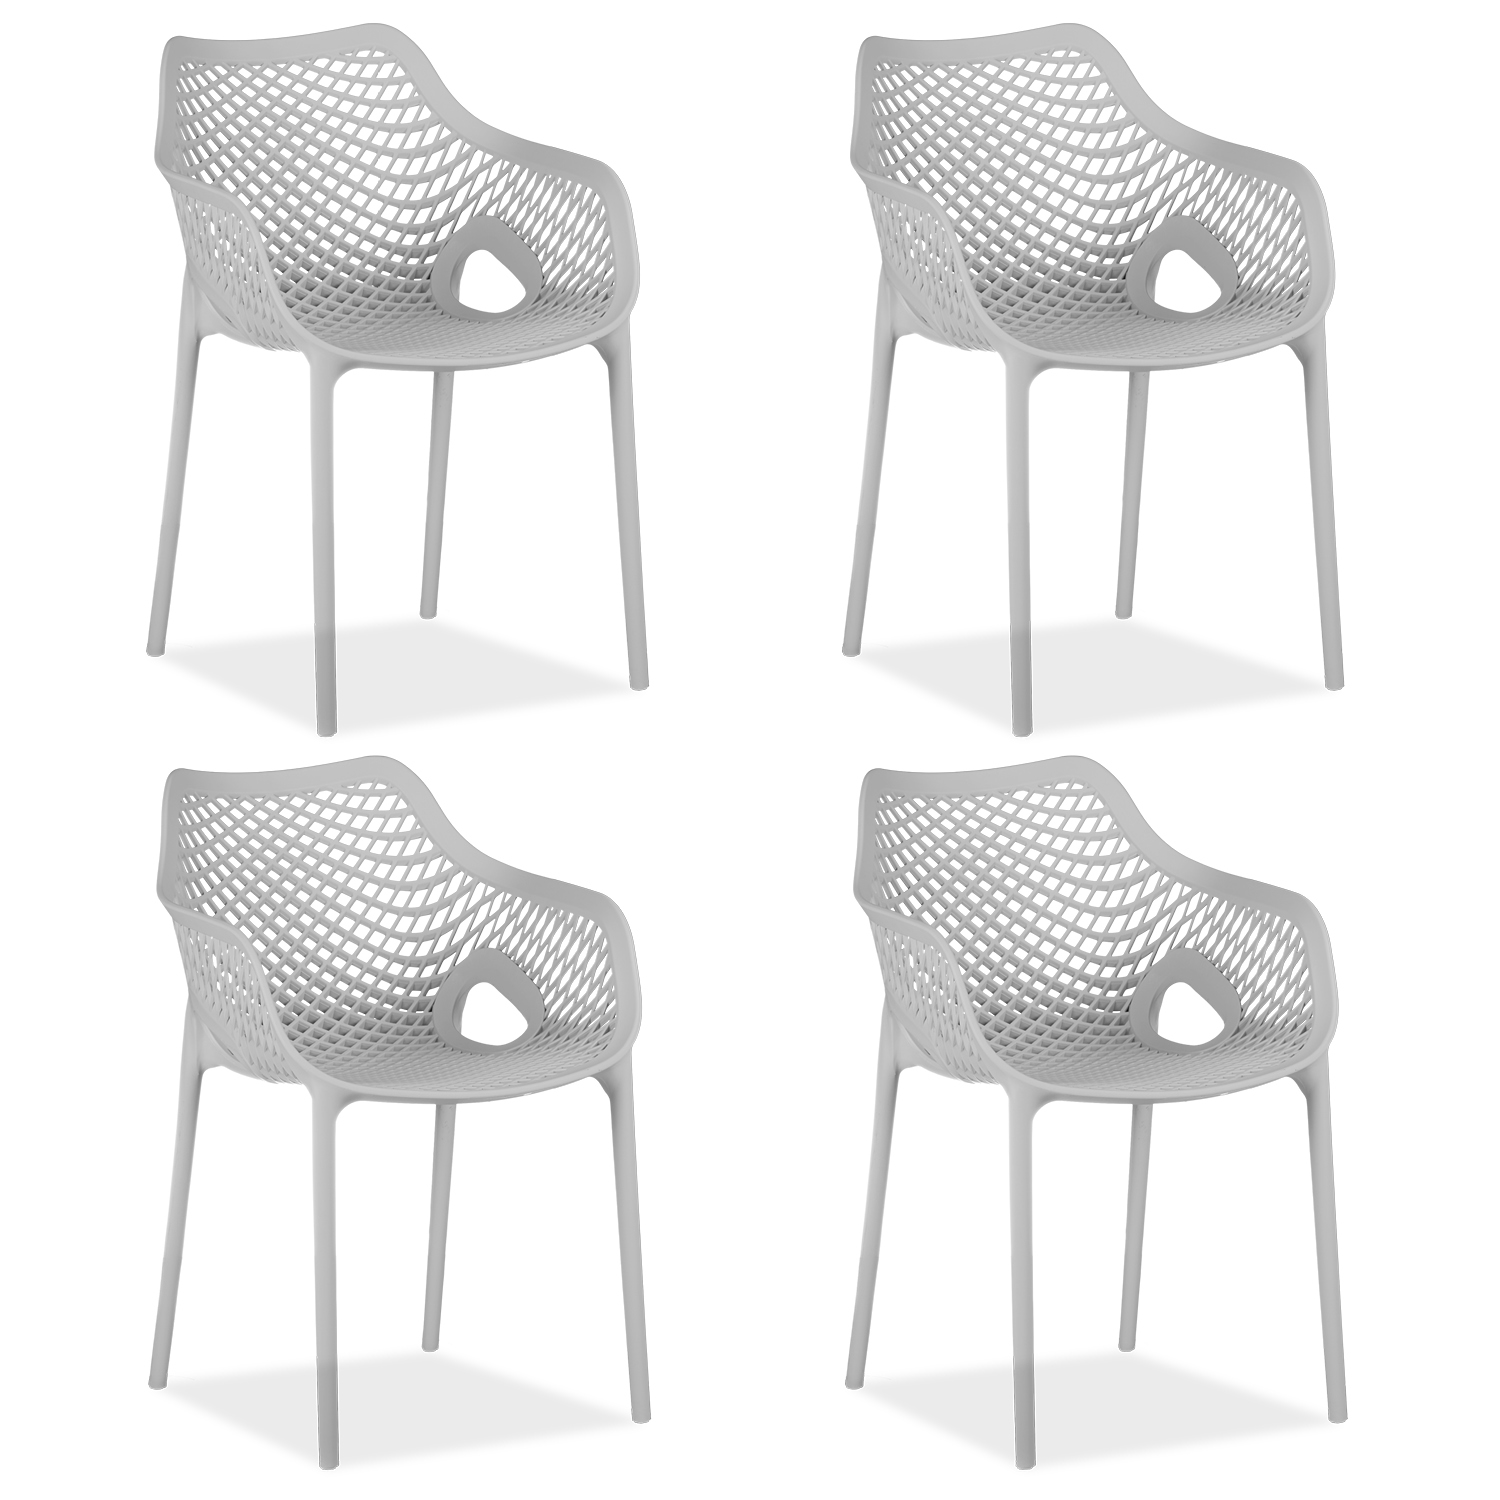 Garden chair with armrests Set of 4 Camping chairs Grey Outdoor chairs Plastic Egg chair Lounger chairs Stacking chairs